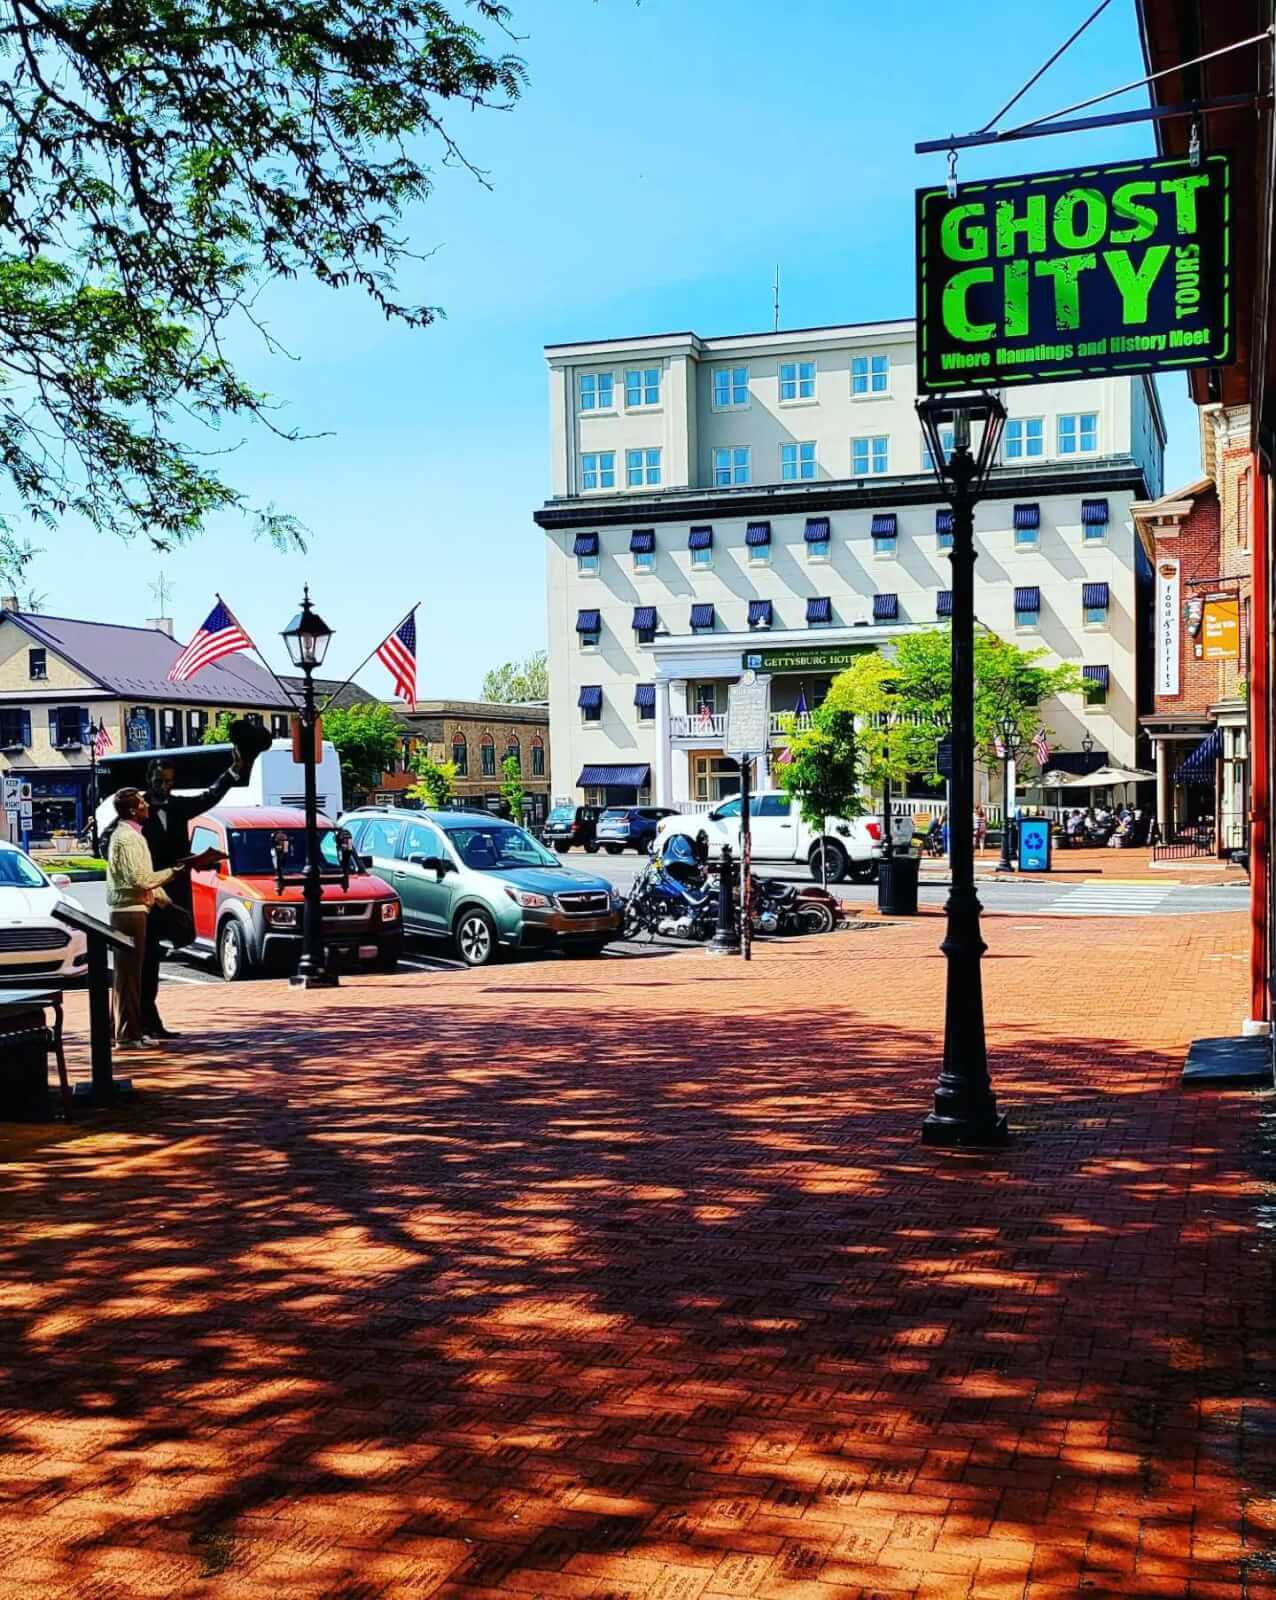 ghost city tours of gettysburg reviews